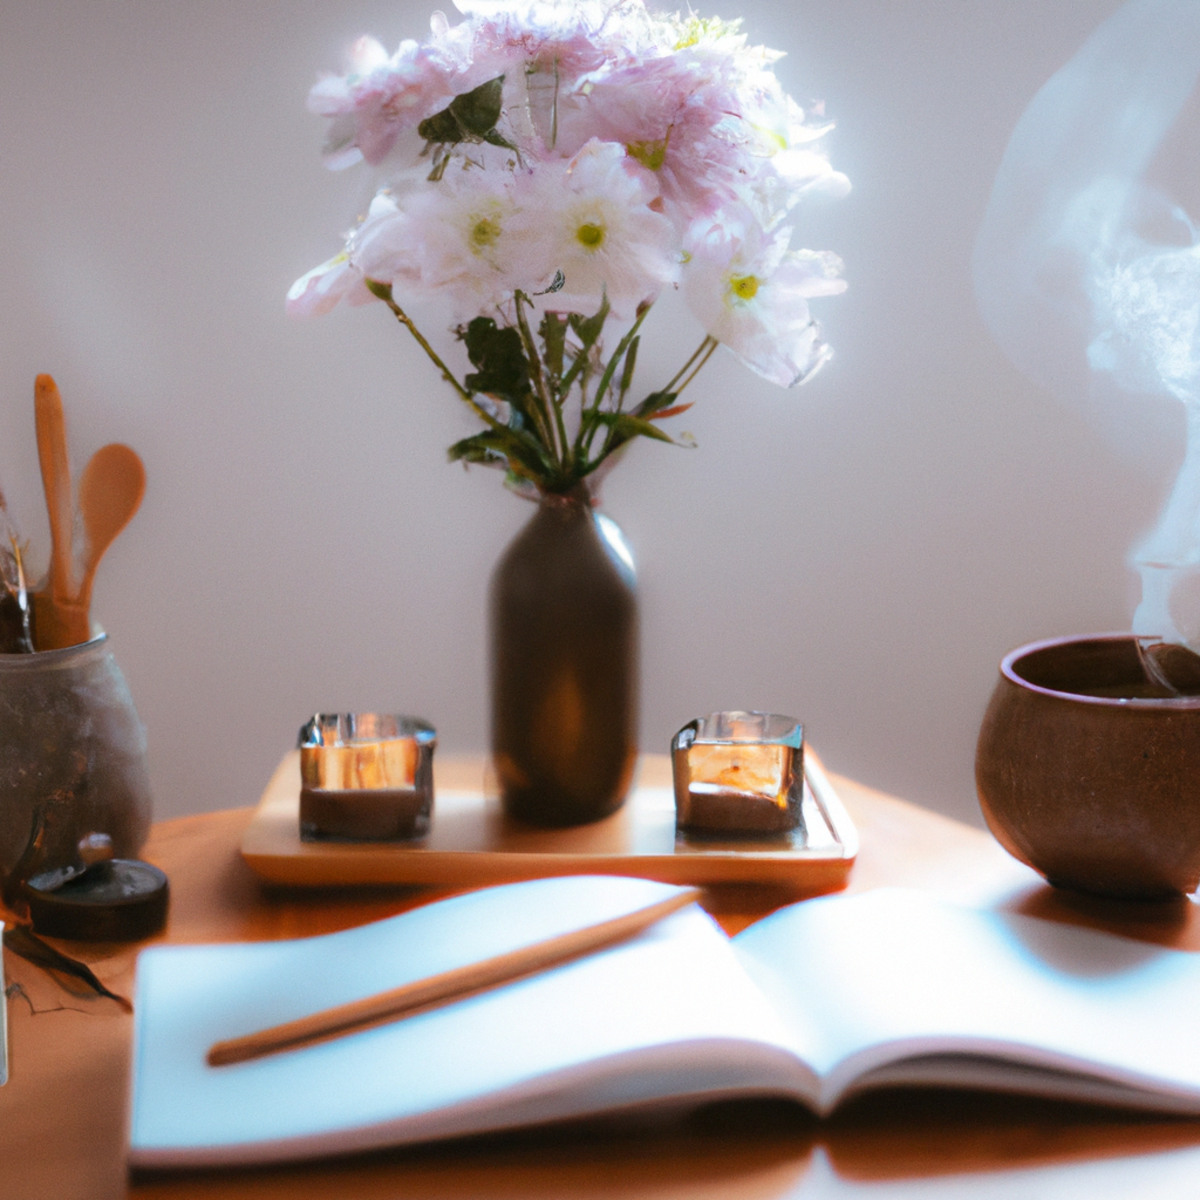 Mindful table setup with tea, flowers, book, journal, and diffuser, promoting stress management through mindfulness.